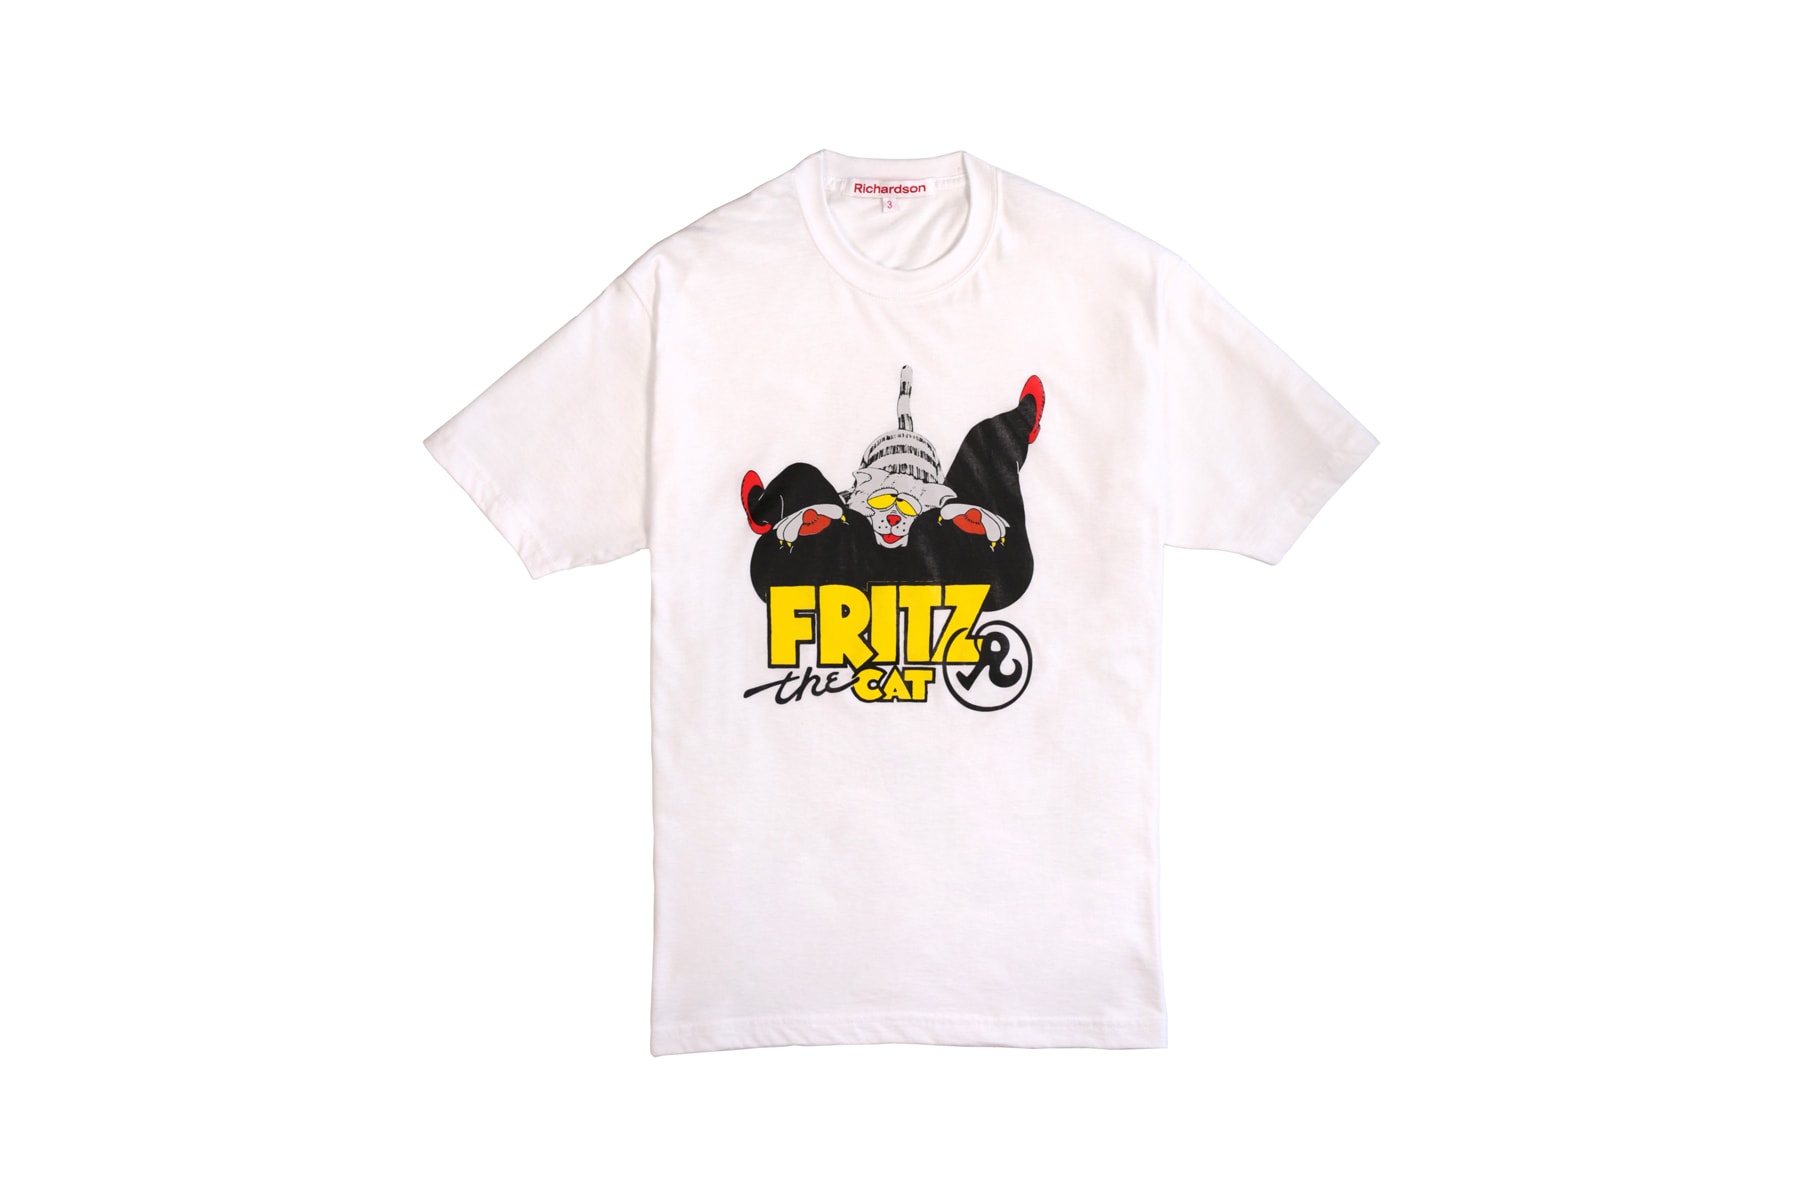 richardson fall winter collection apparel clothing fashion style streetwear graphics fritz the cat cartoon